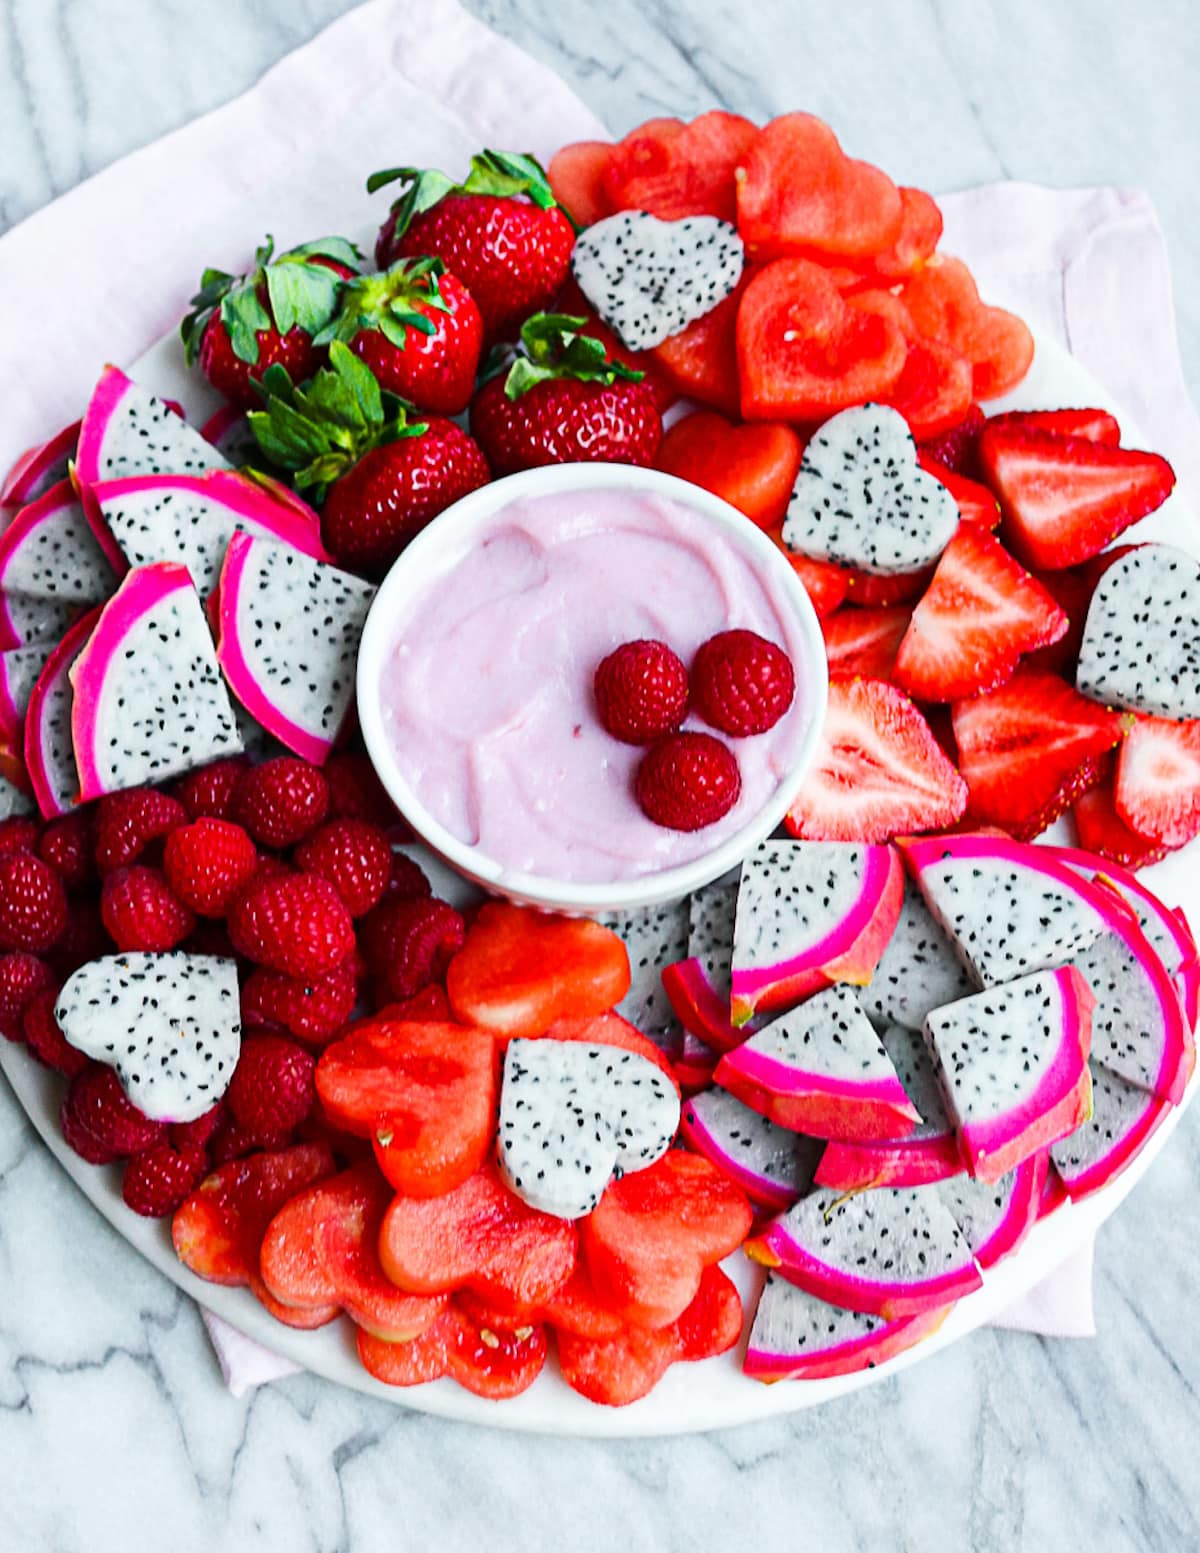 A platter filled with fresh red fruits and with a bowl of dip in the middle